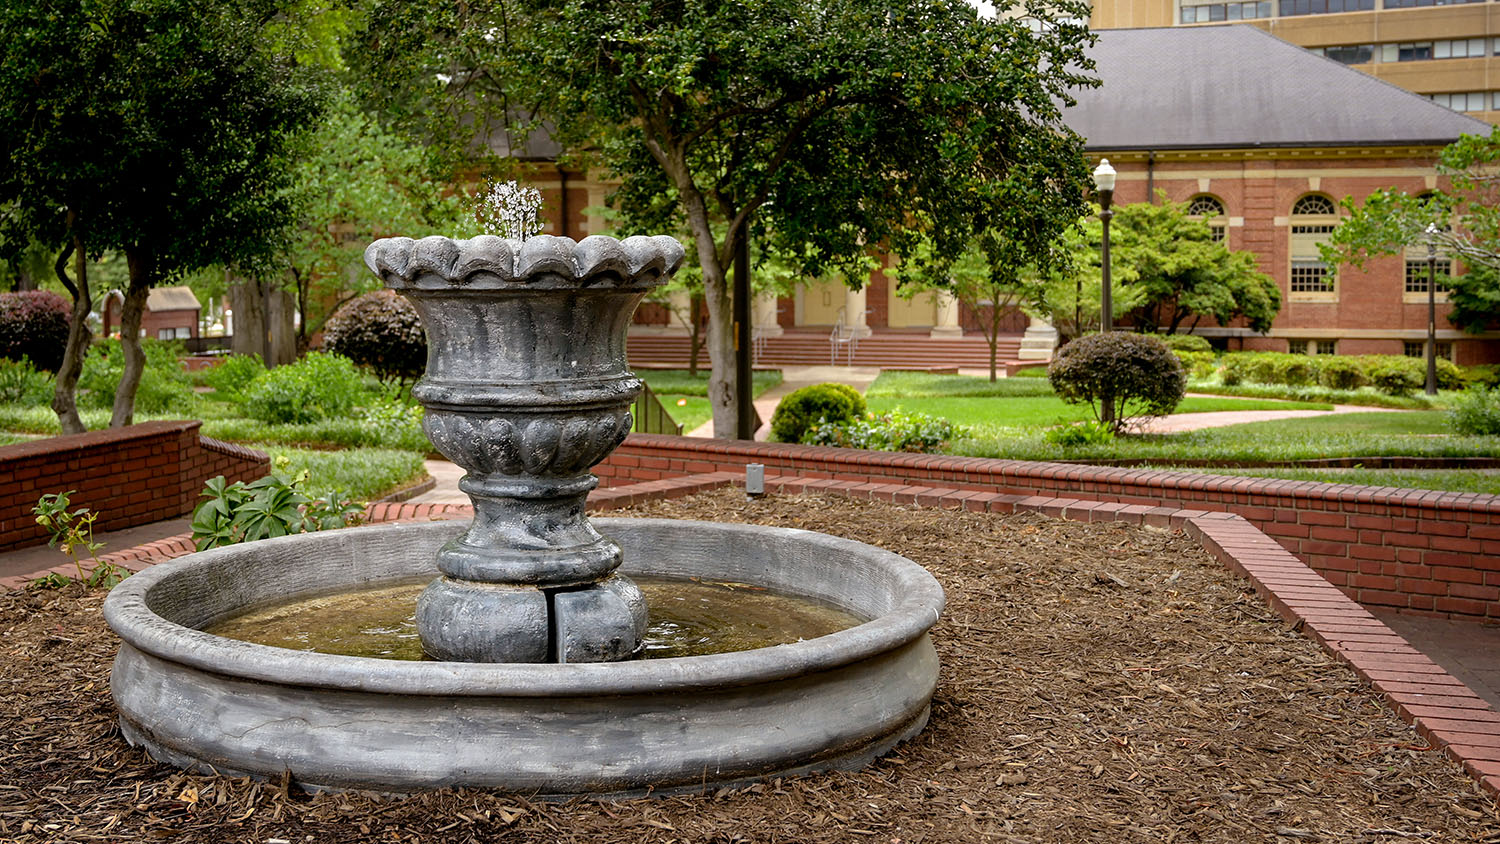 A fountain gushes with water in the foreground at Mary Yarbrough Court, with trees and vegetation in the background.